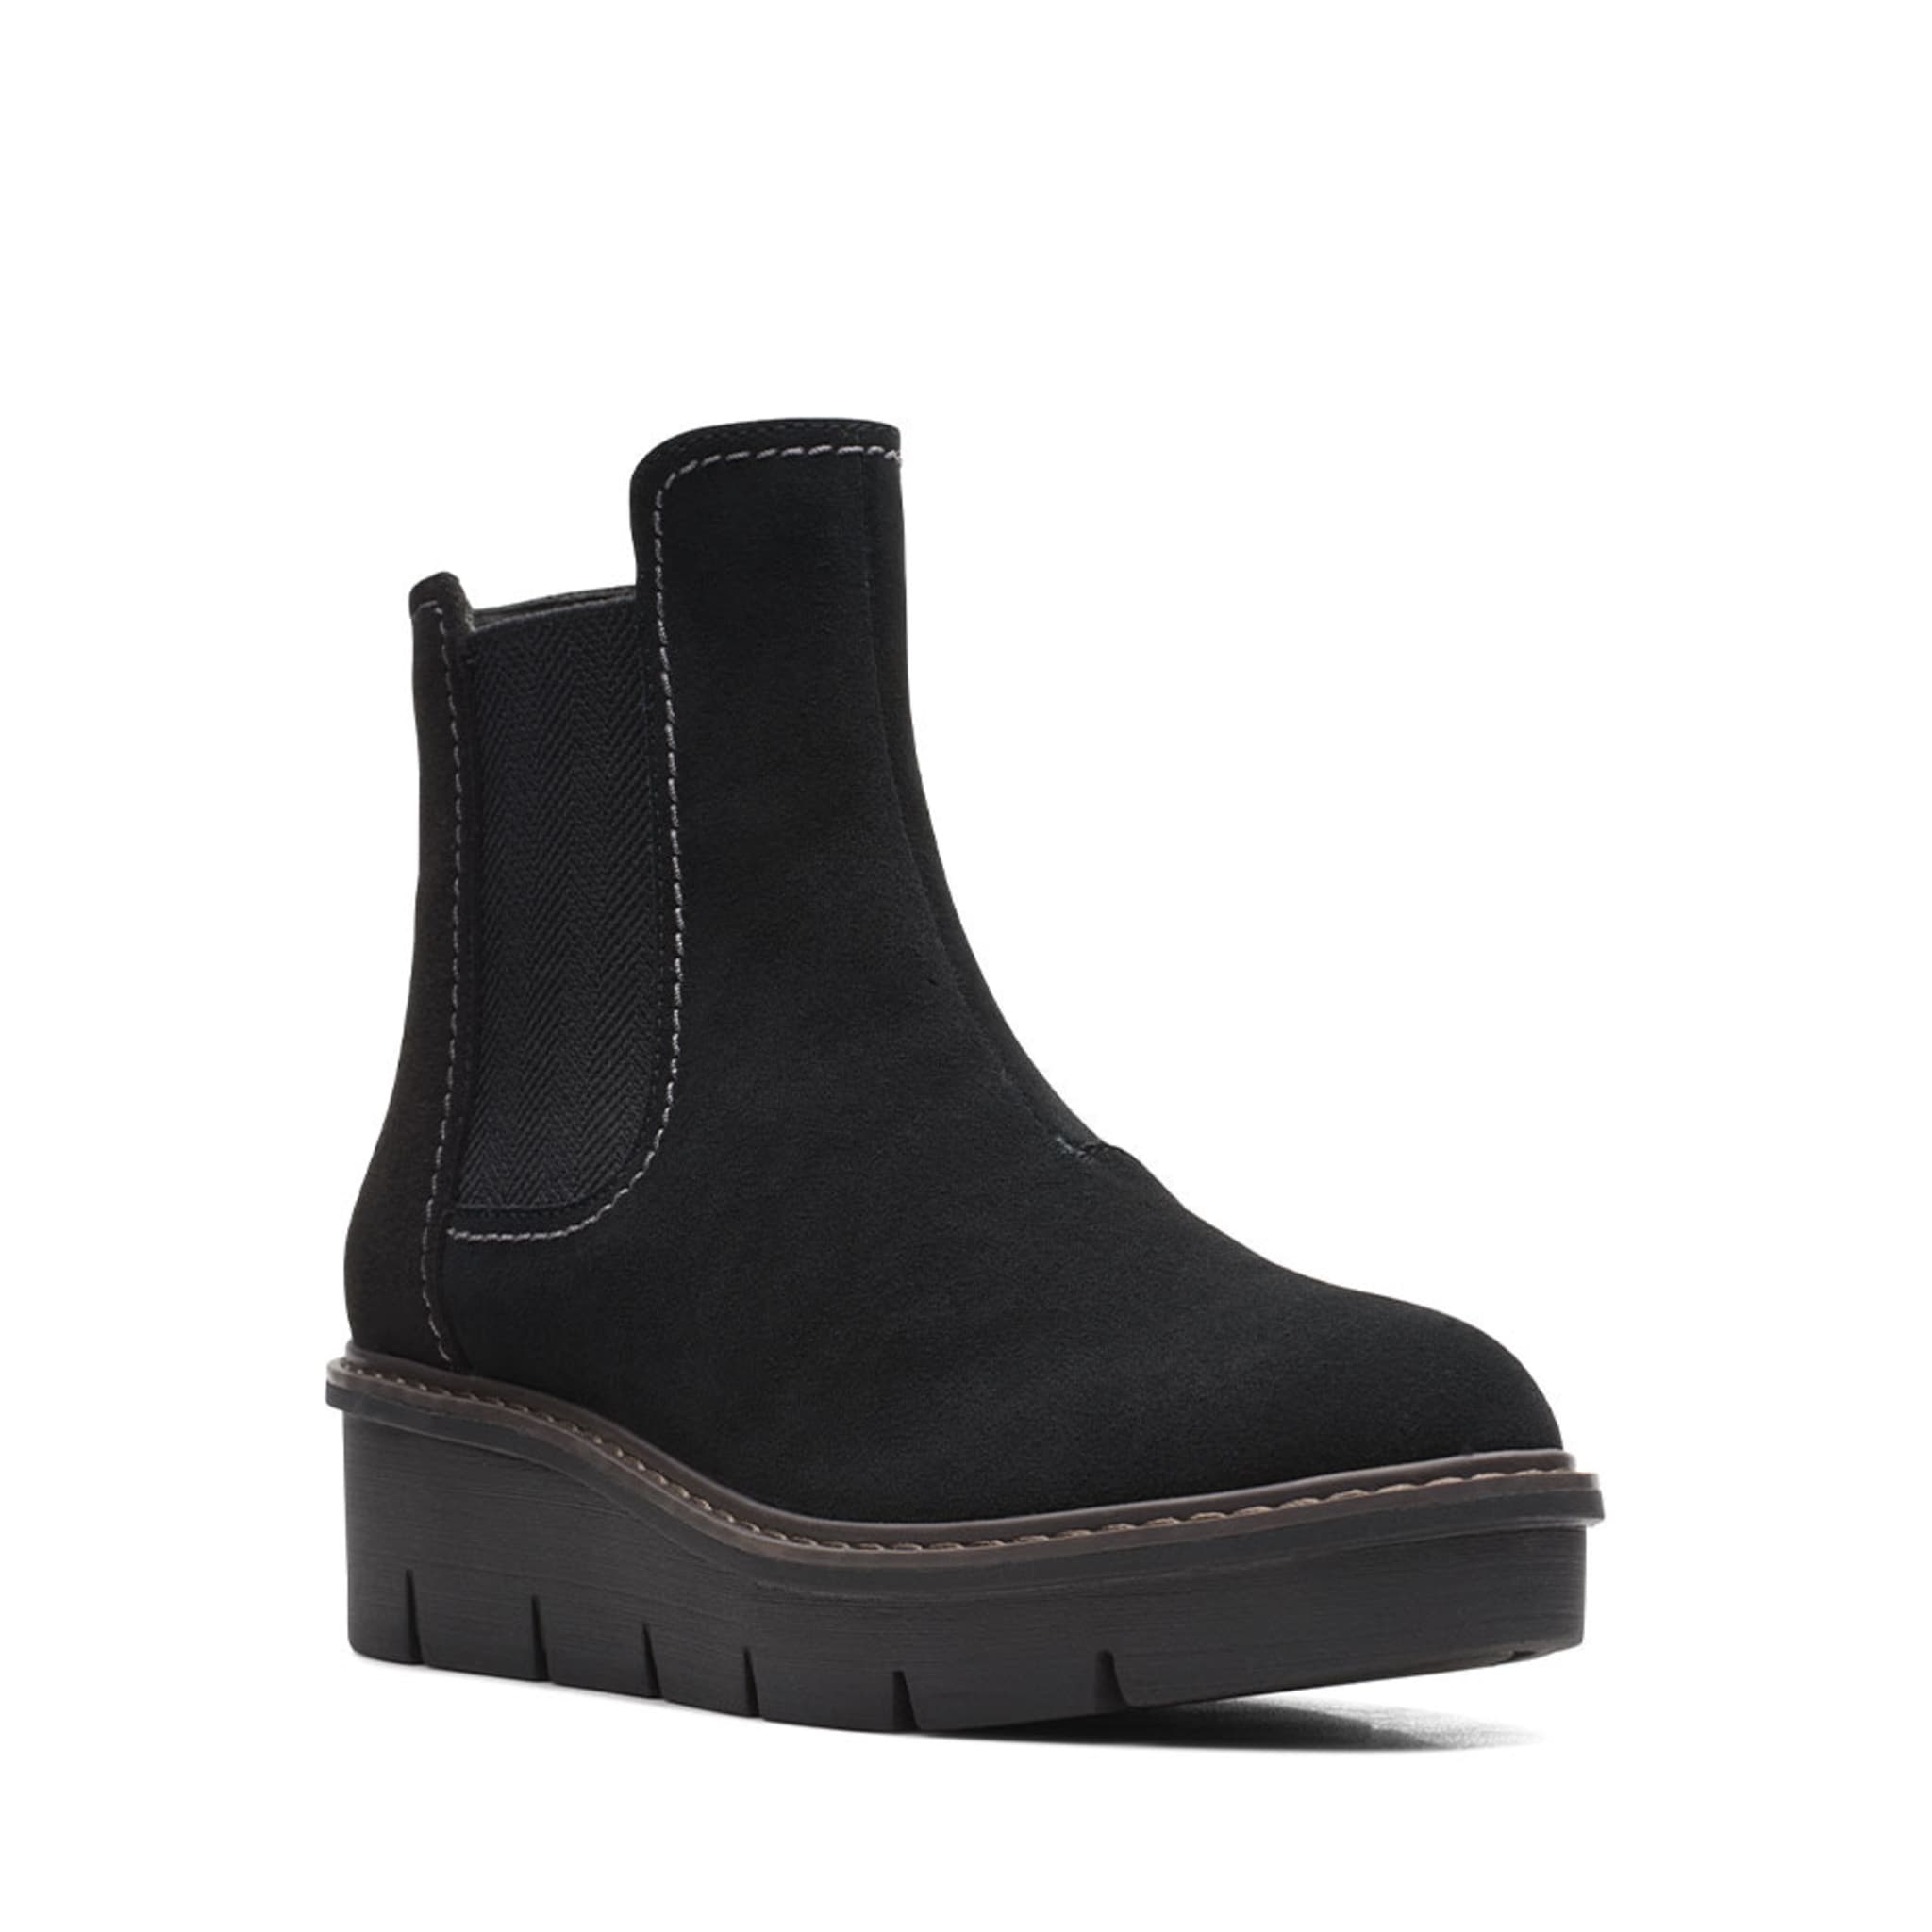 Airabell Move Boots, Black Suede